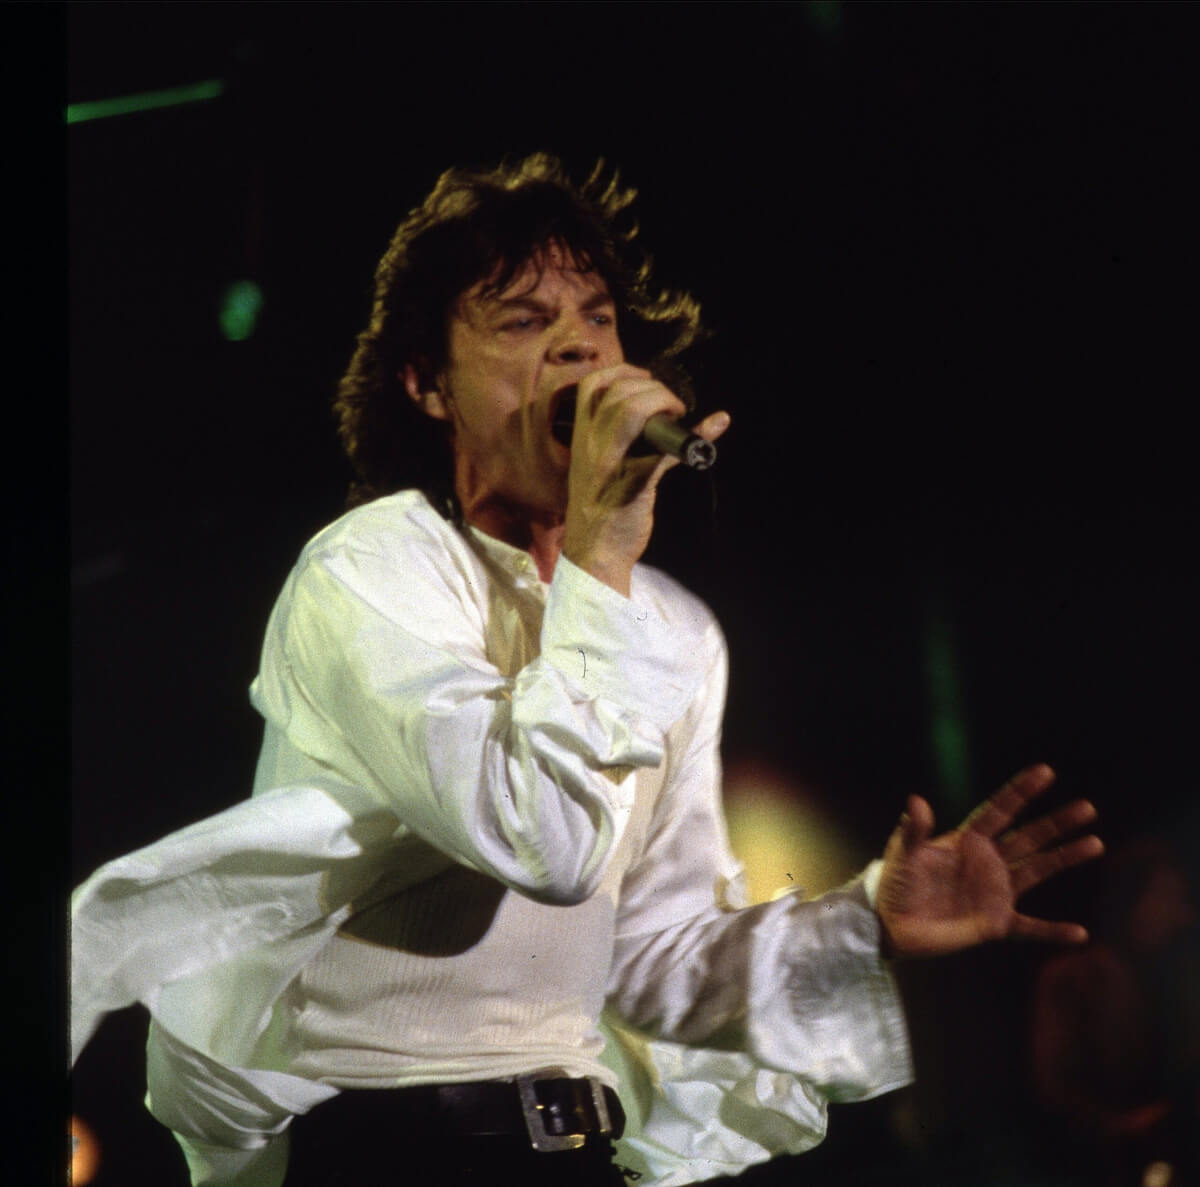 Mick Jagger performing in 1994 in Washington, D.C.